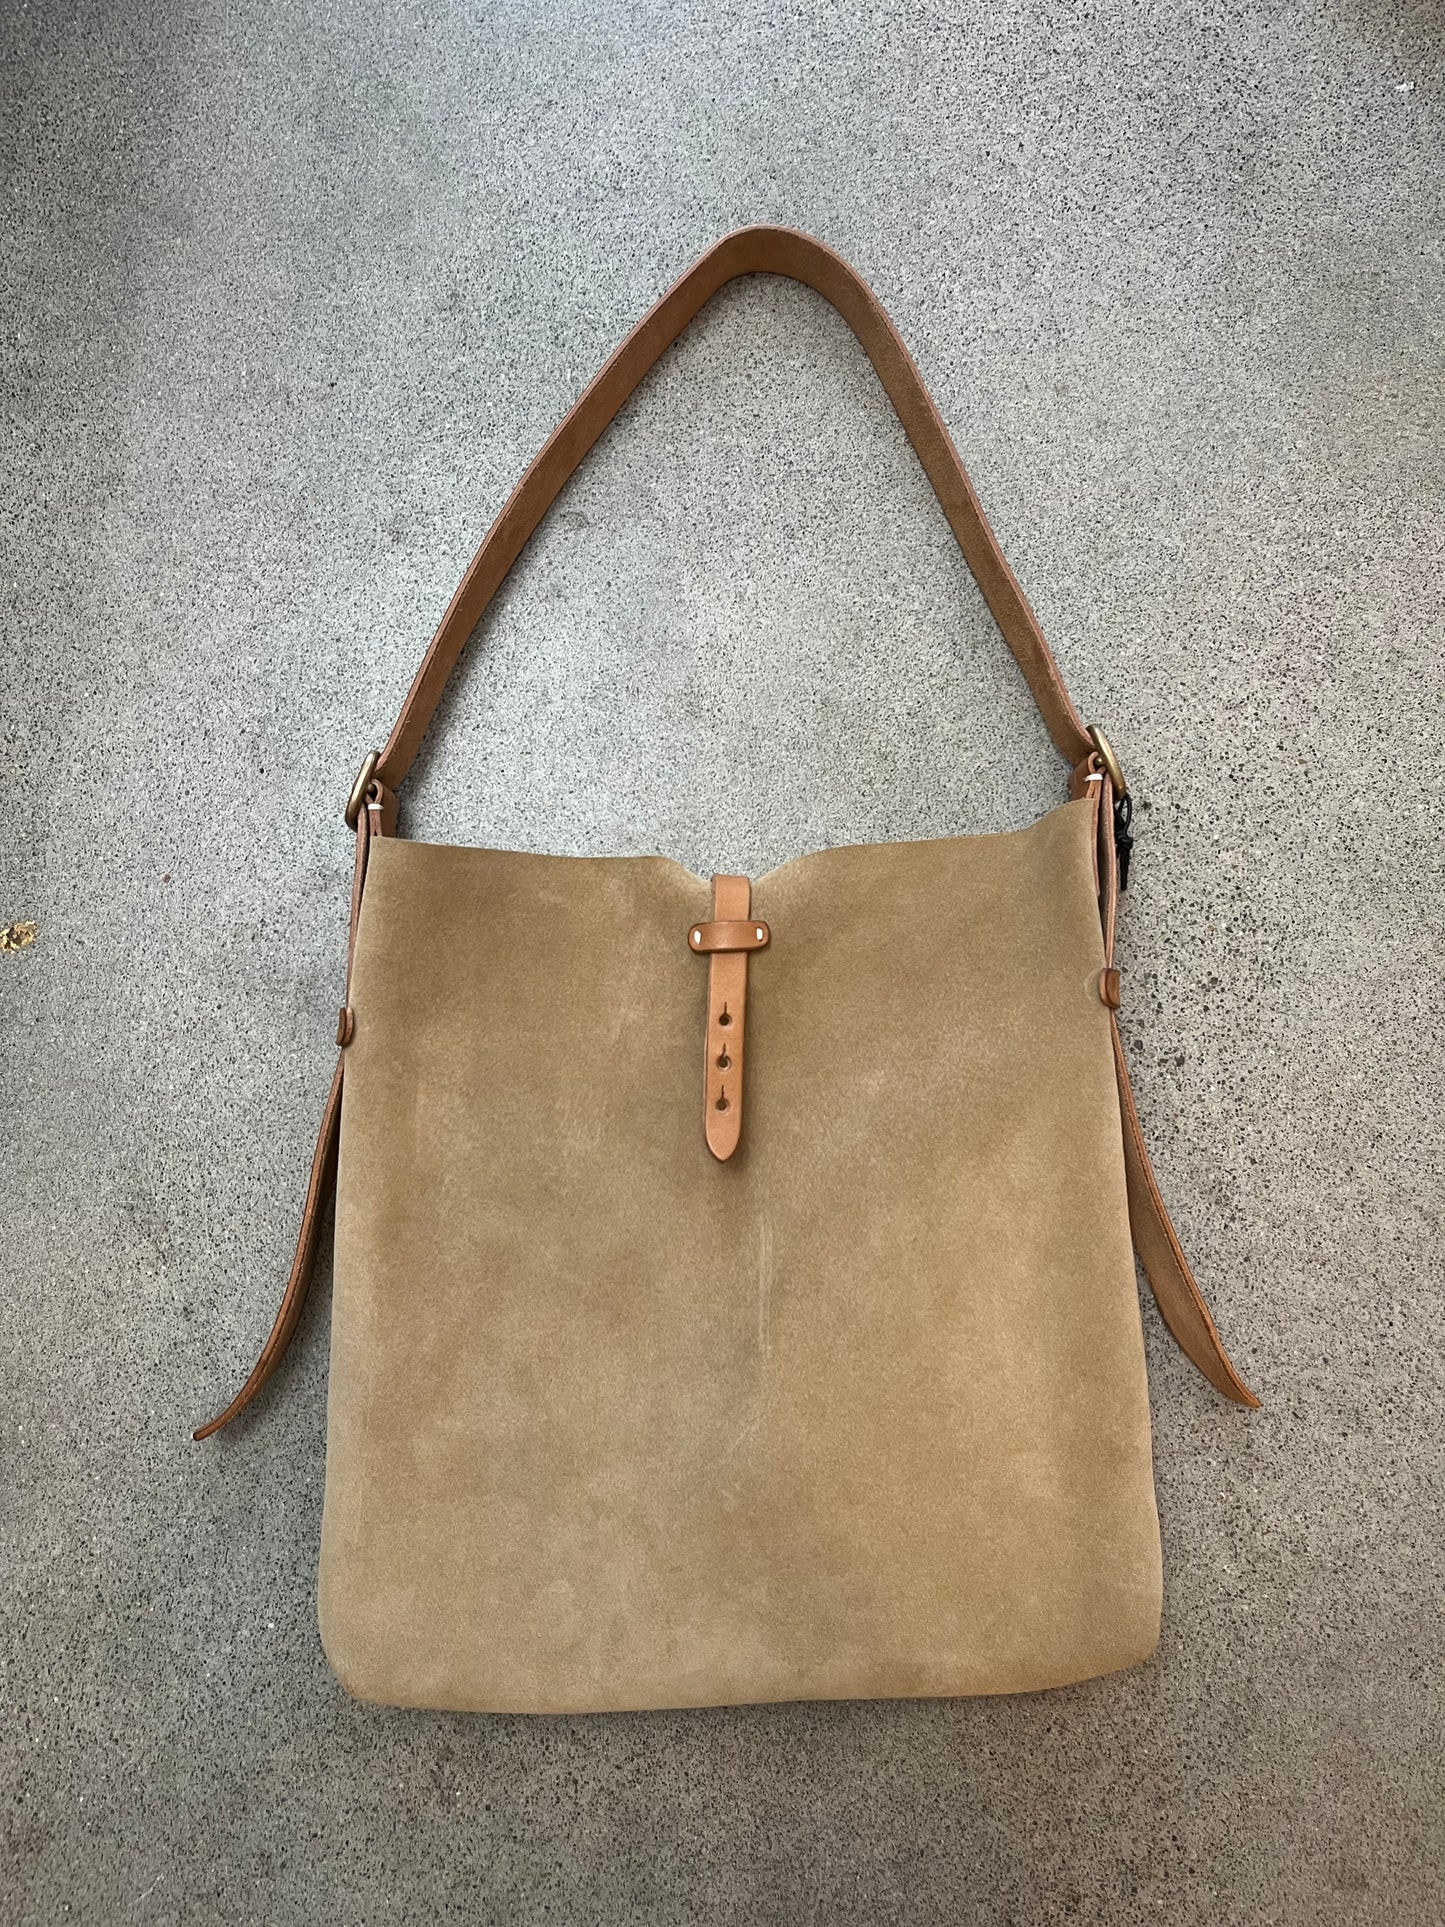 Massimo Palomba - Thelma  Suede Tote in Sand